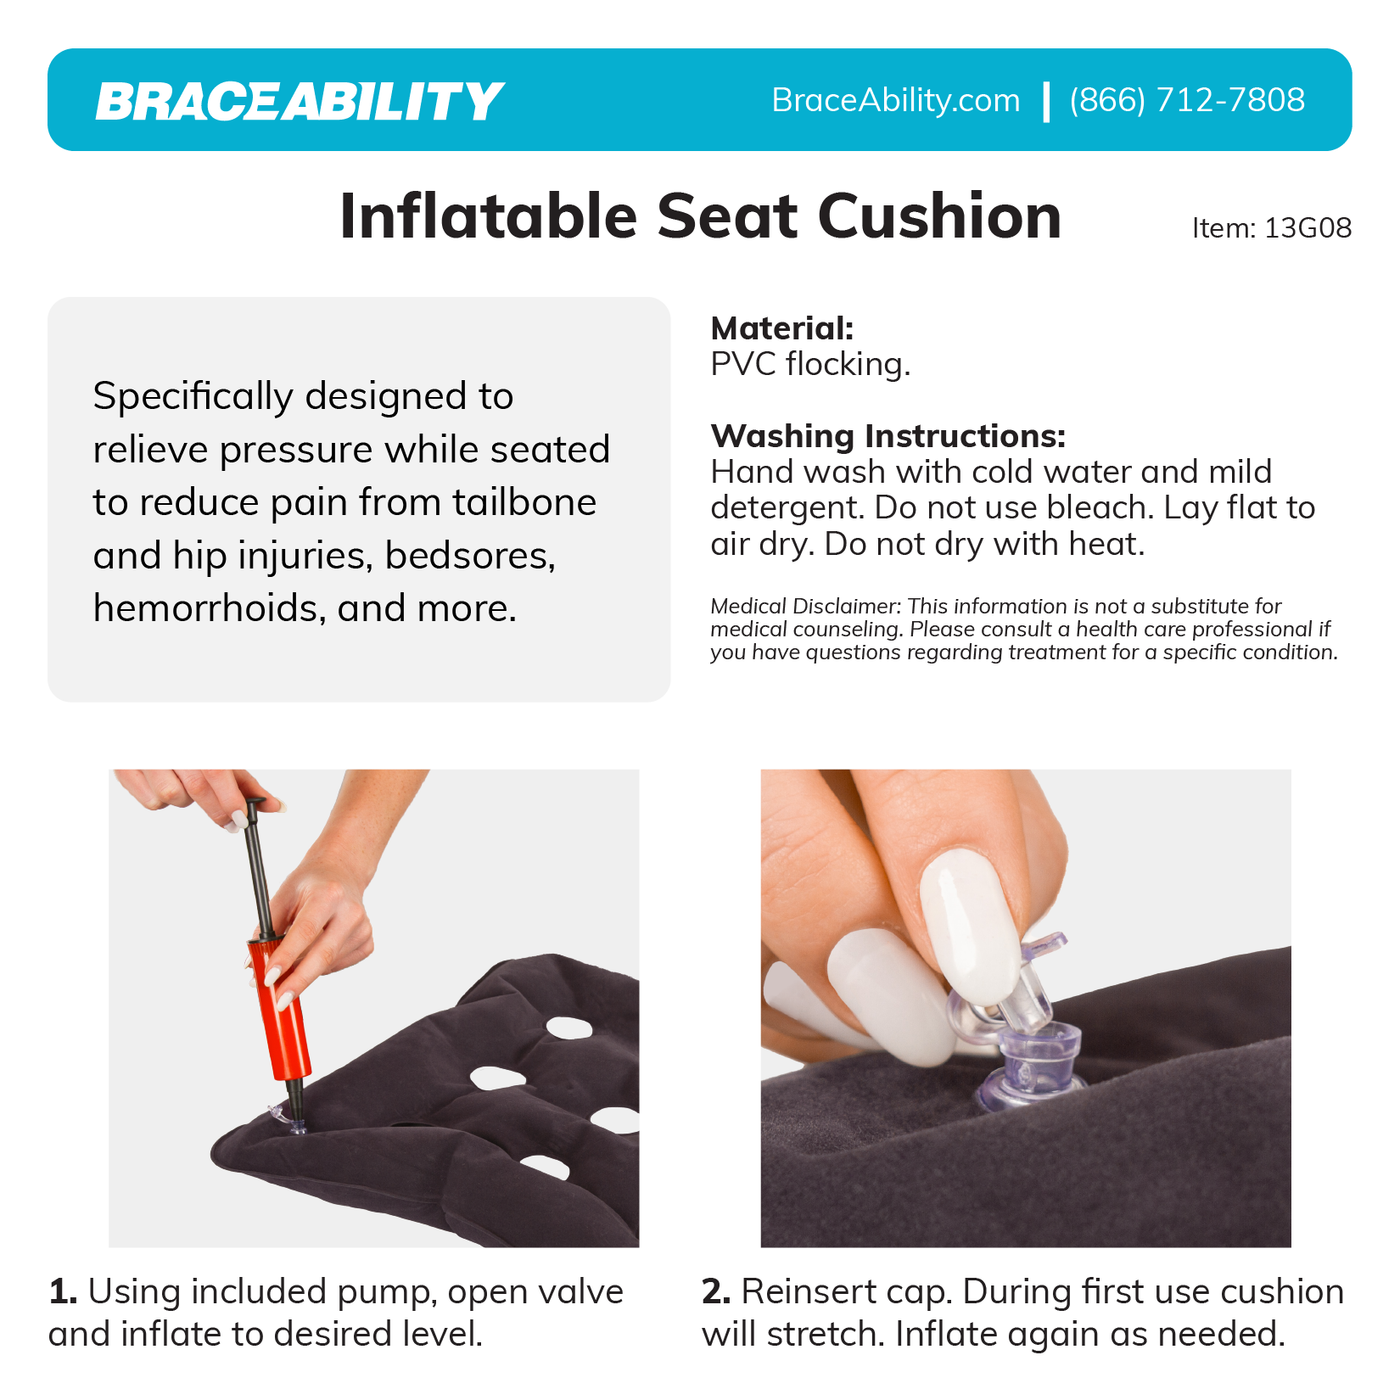 the instruction sheet for the inflatable seat cushion is simple, open valve and inflate to desired compression level.